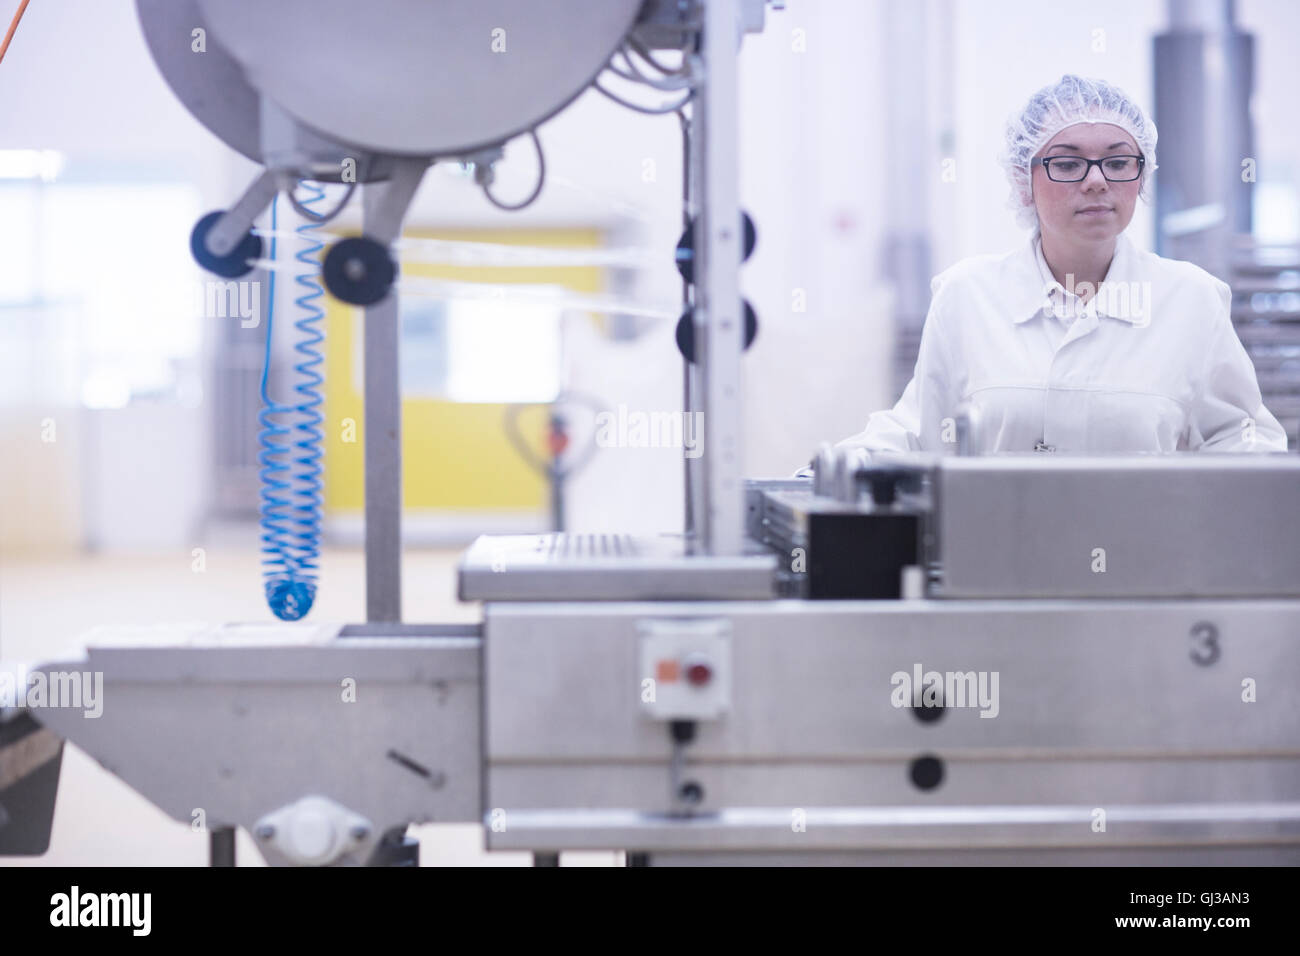 Factory worker operating food production machinery Stock Photo